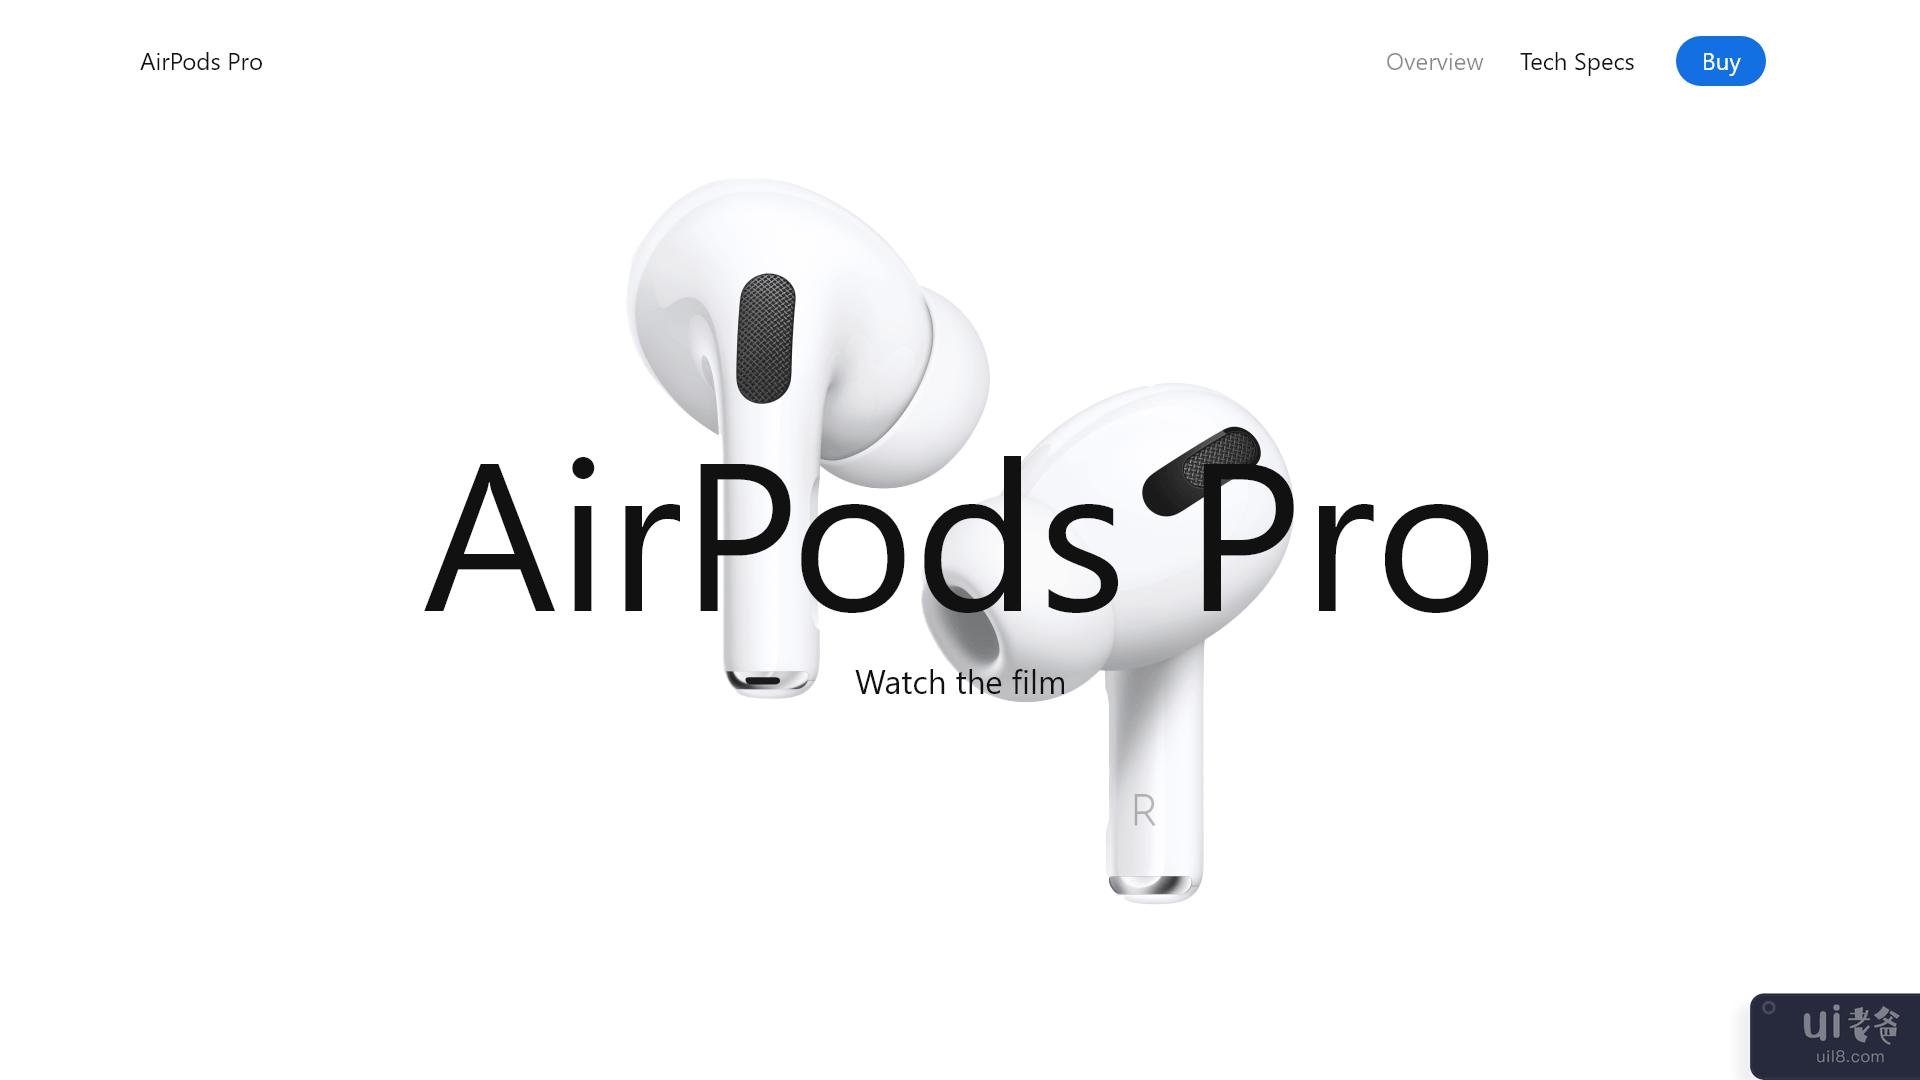 AirPods Pro - 网页重新设计(AirPods Pro - Web Redesign)插图